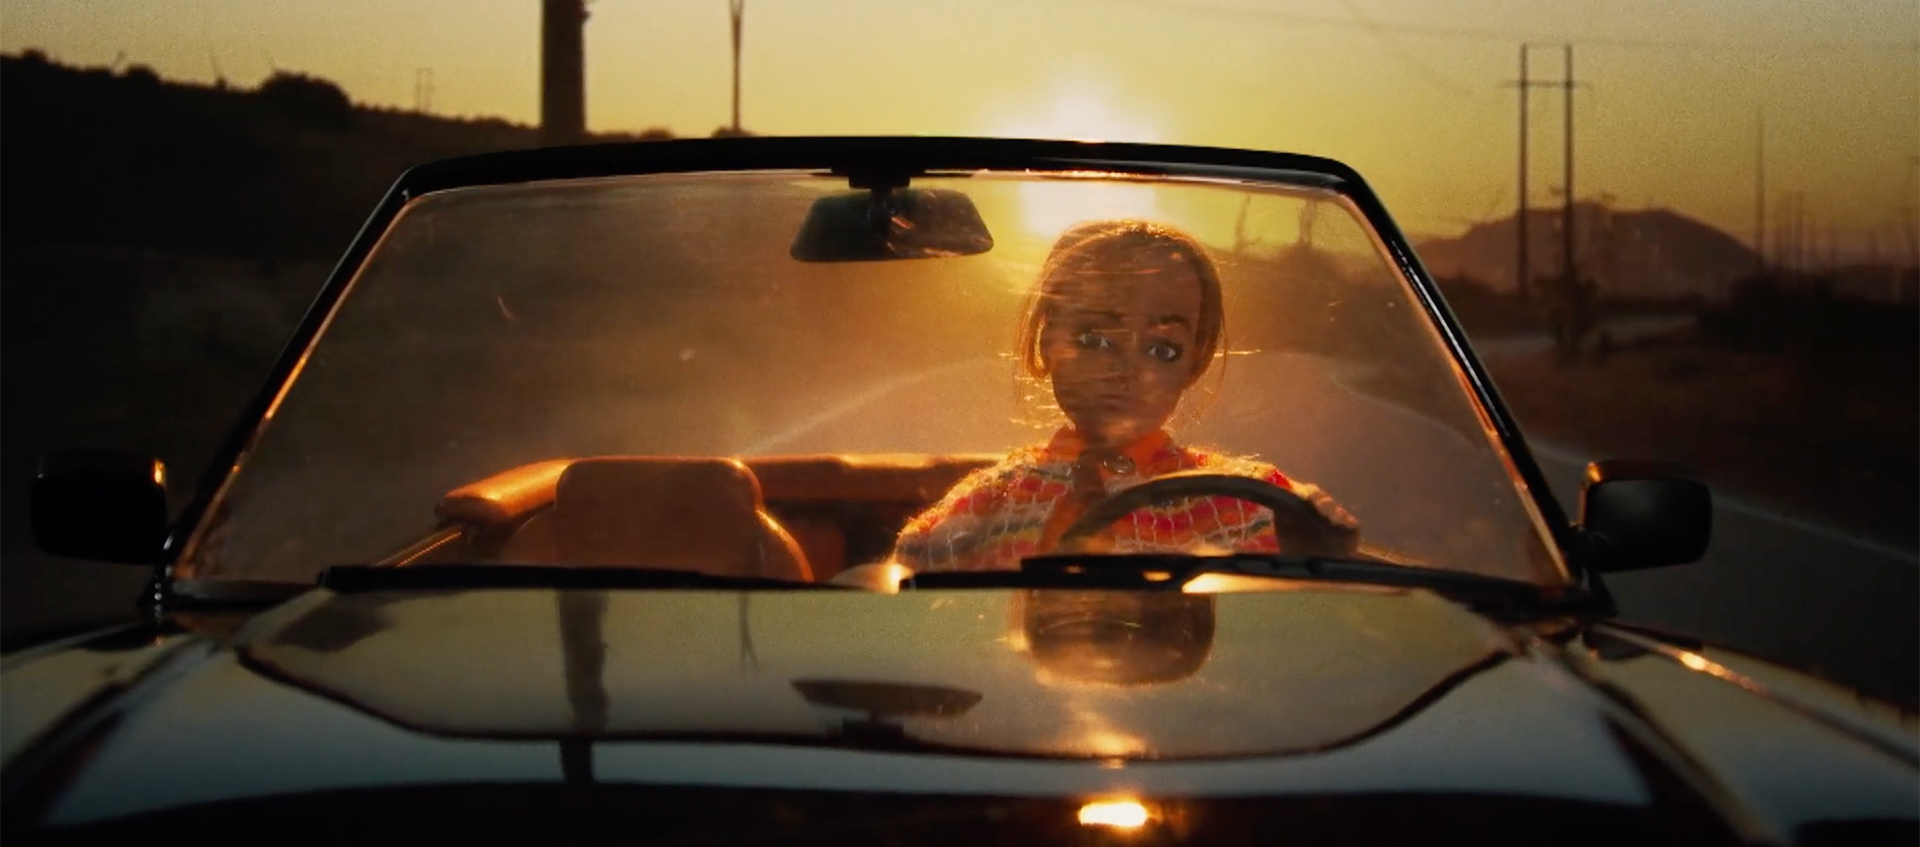 Scene from the animated short "Lee Ann Womack's Hollywood" by Chris Ullens